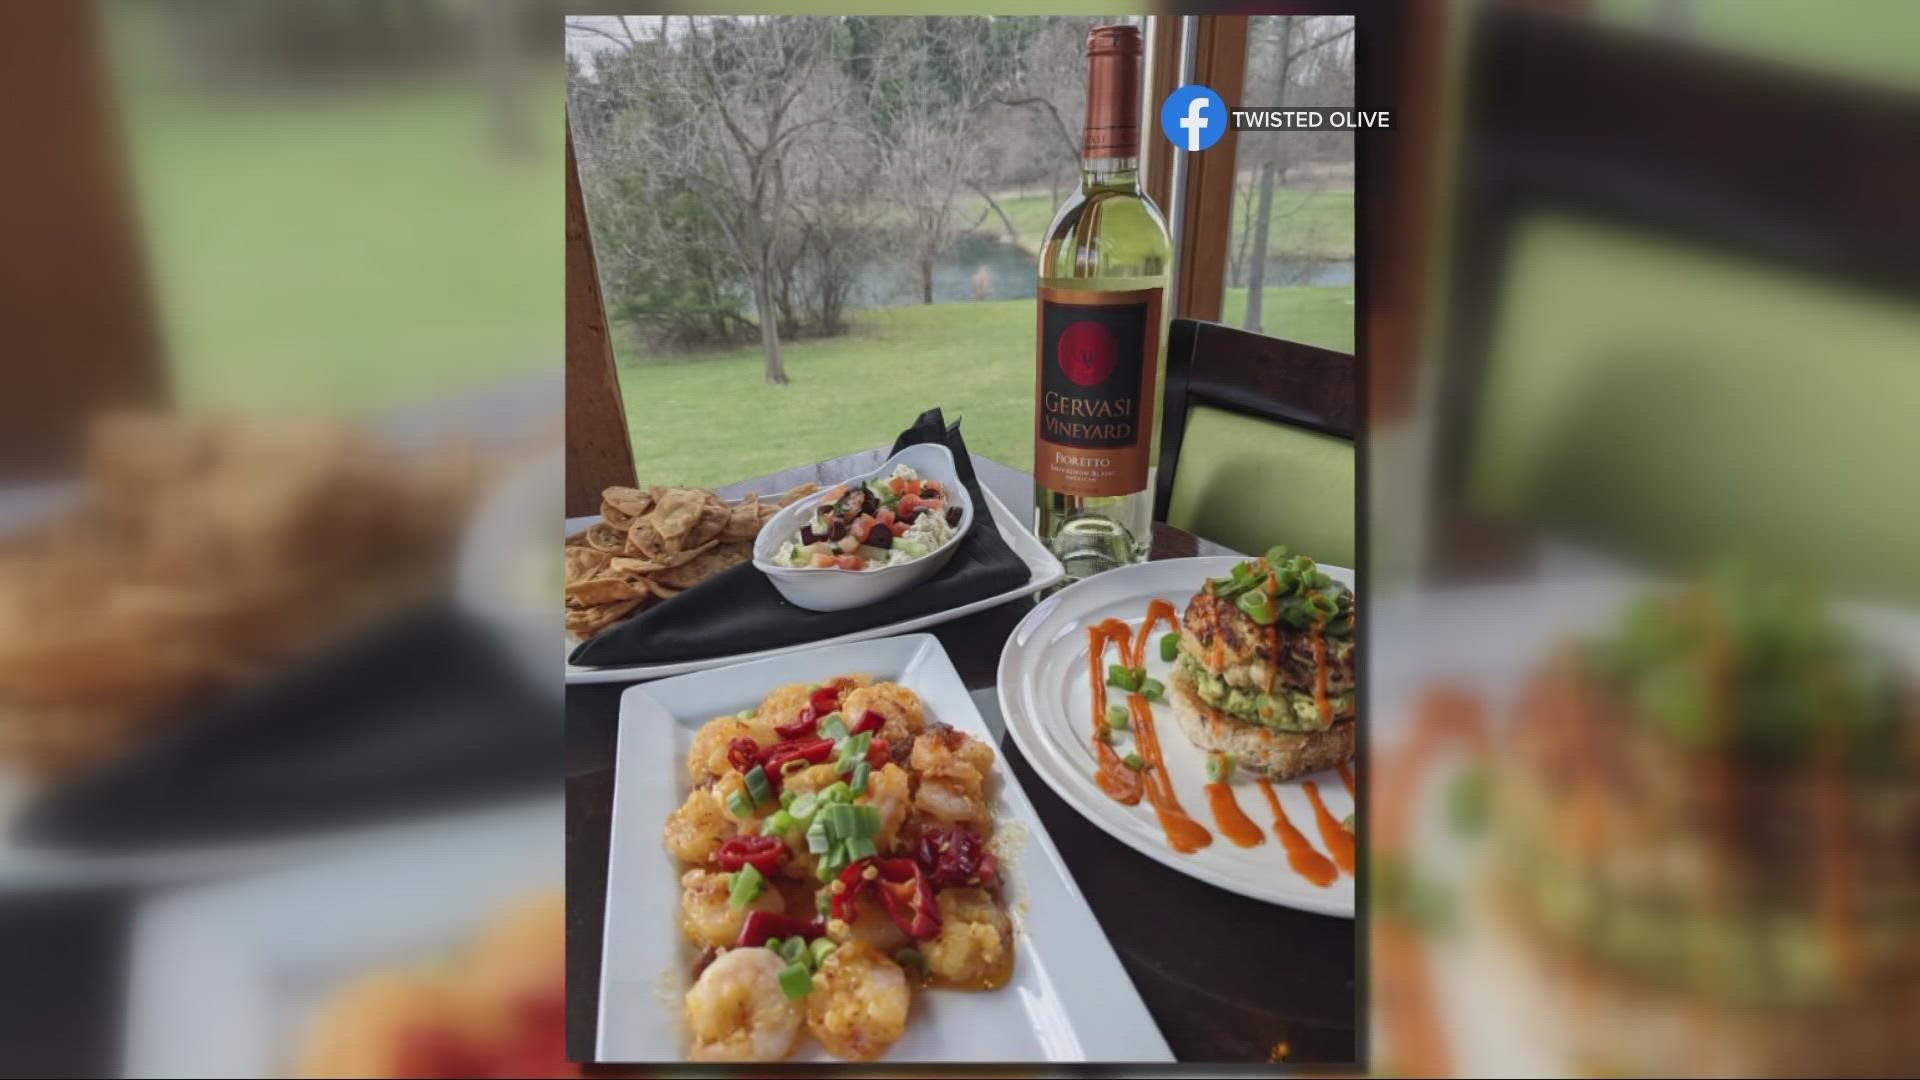 Twisted Olive restaurant named best outdoor in US |